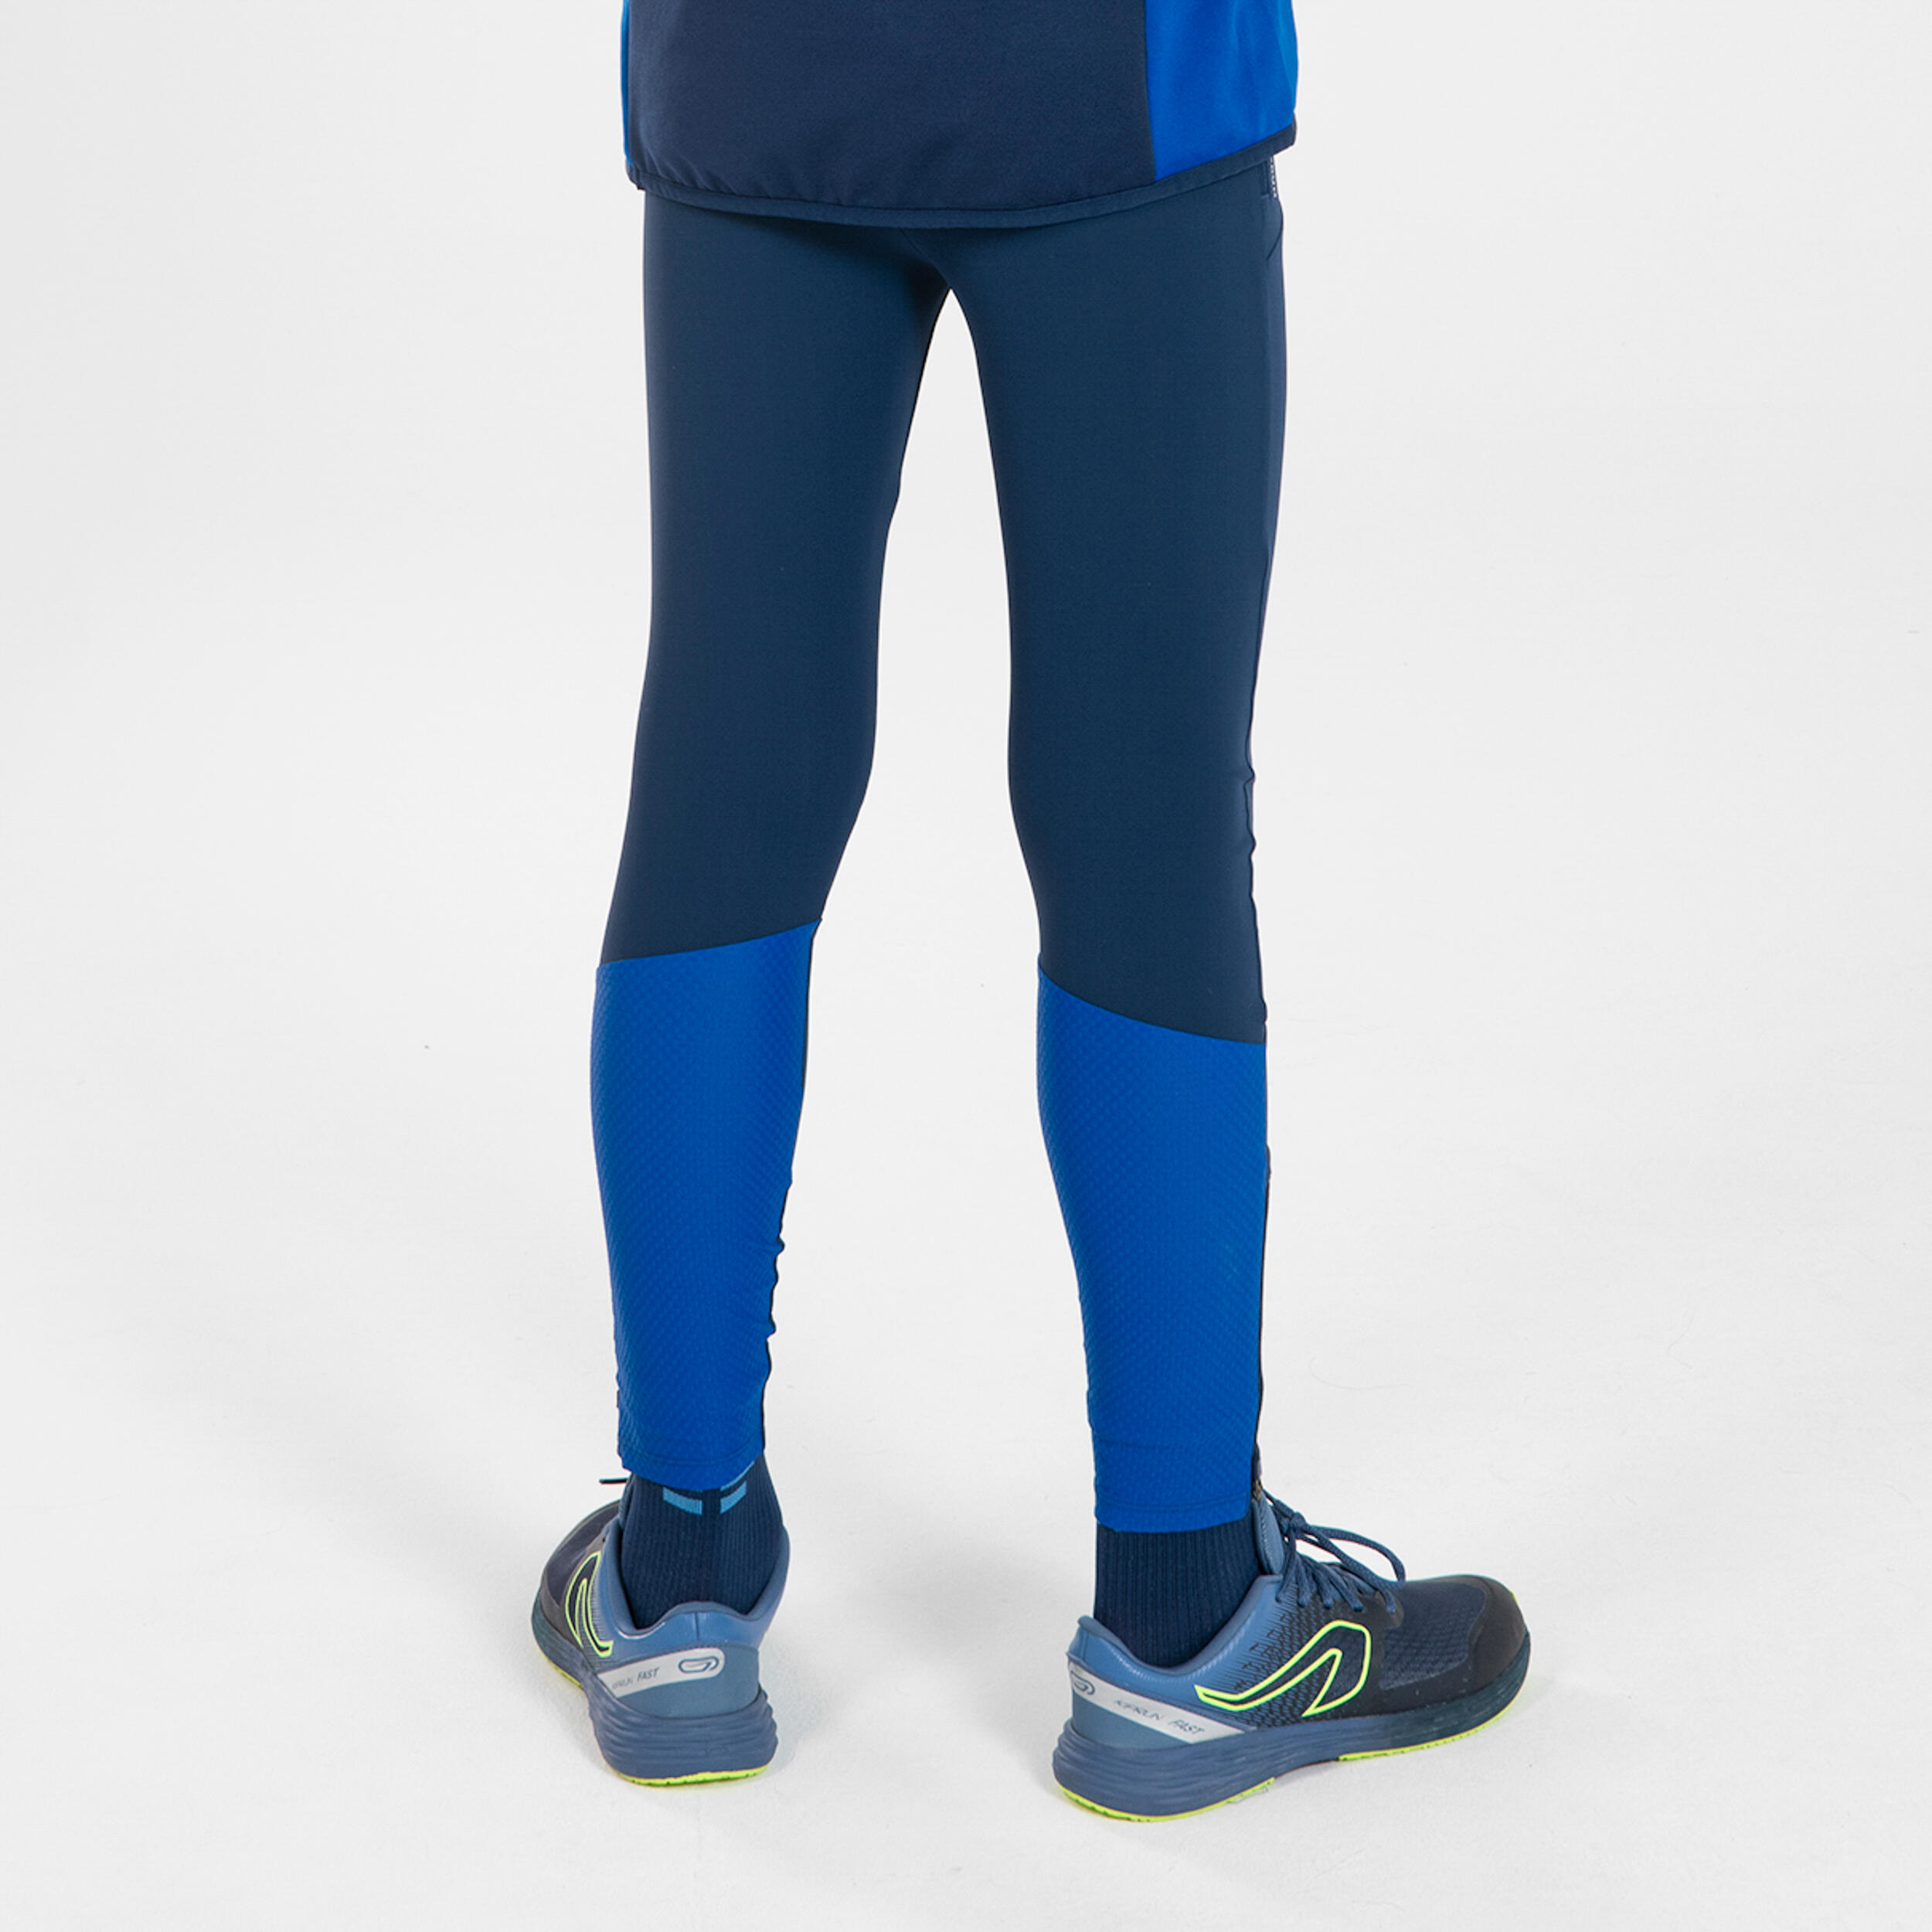 KIDS' RUNNING TIGHTS - KIPRUN DRY+ NAVY BLUE AND ELECTRIC BLUE 11/13